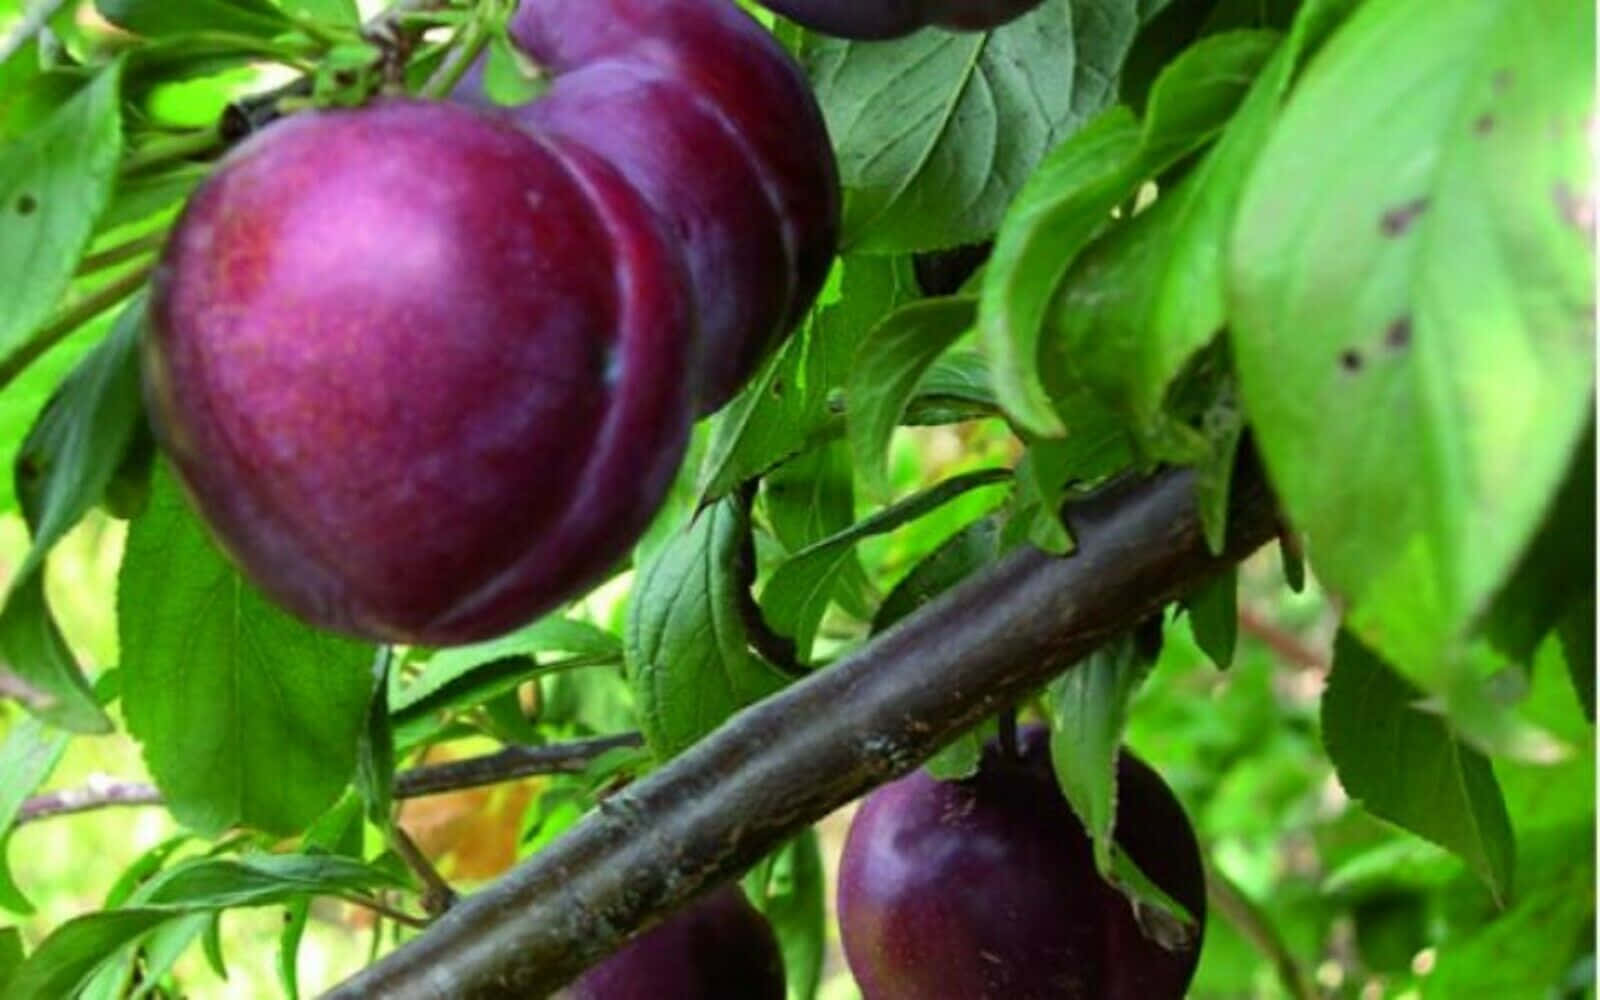 "A perfect summer snack - tasty purple plums!" Wallpaper